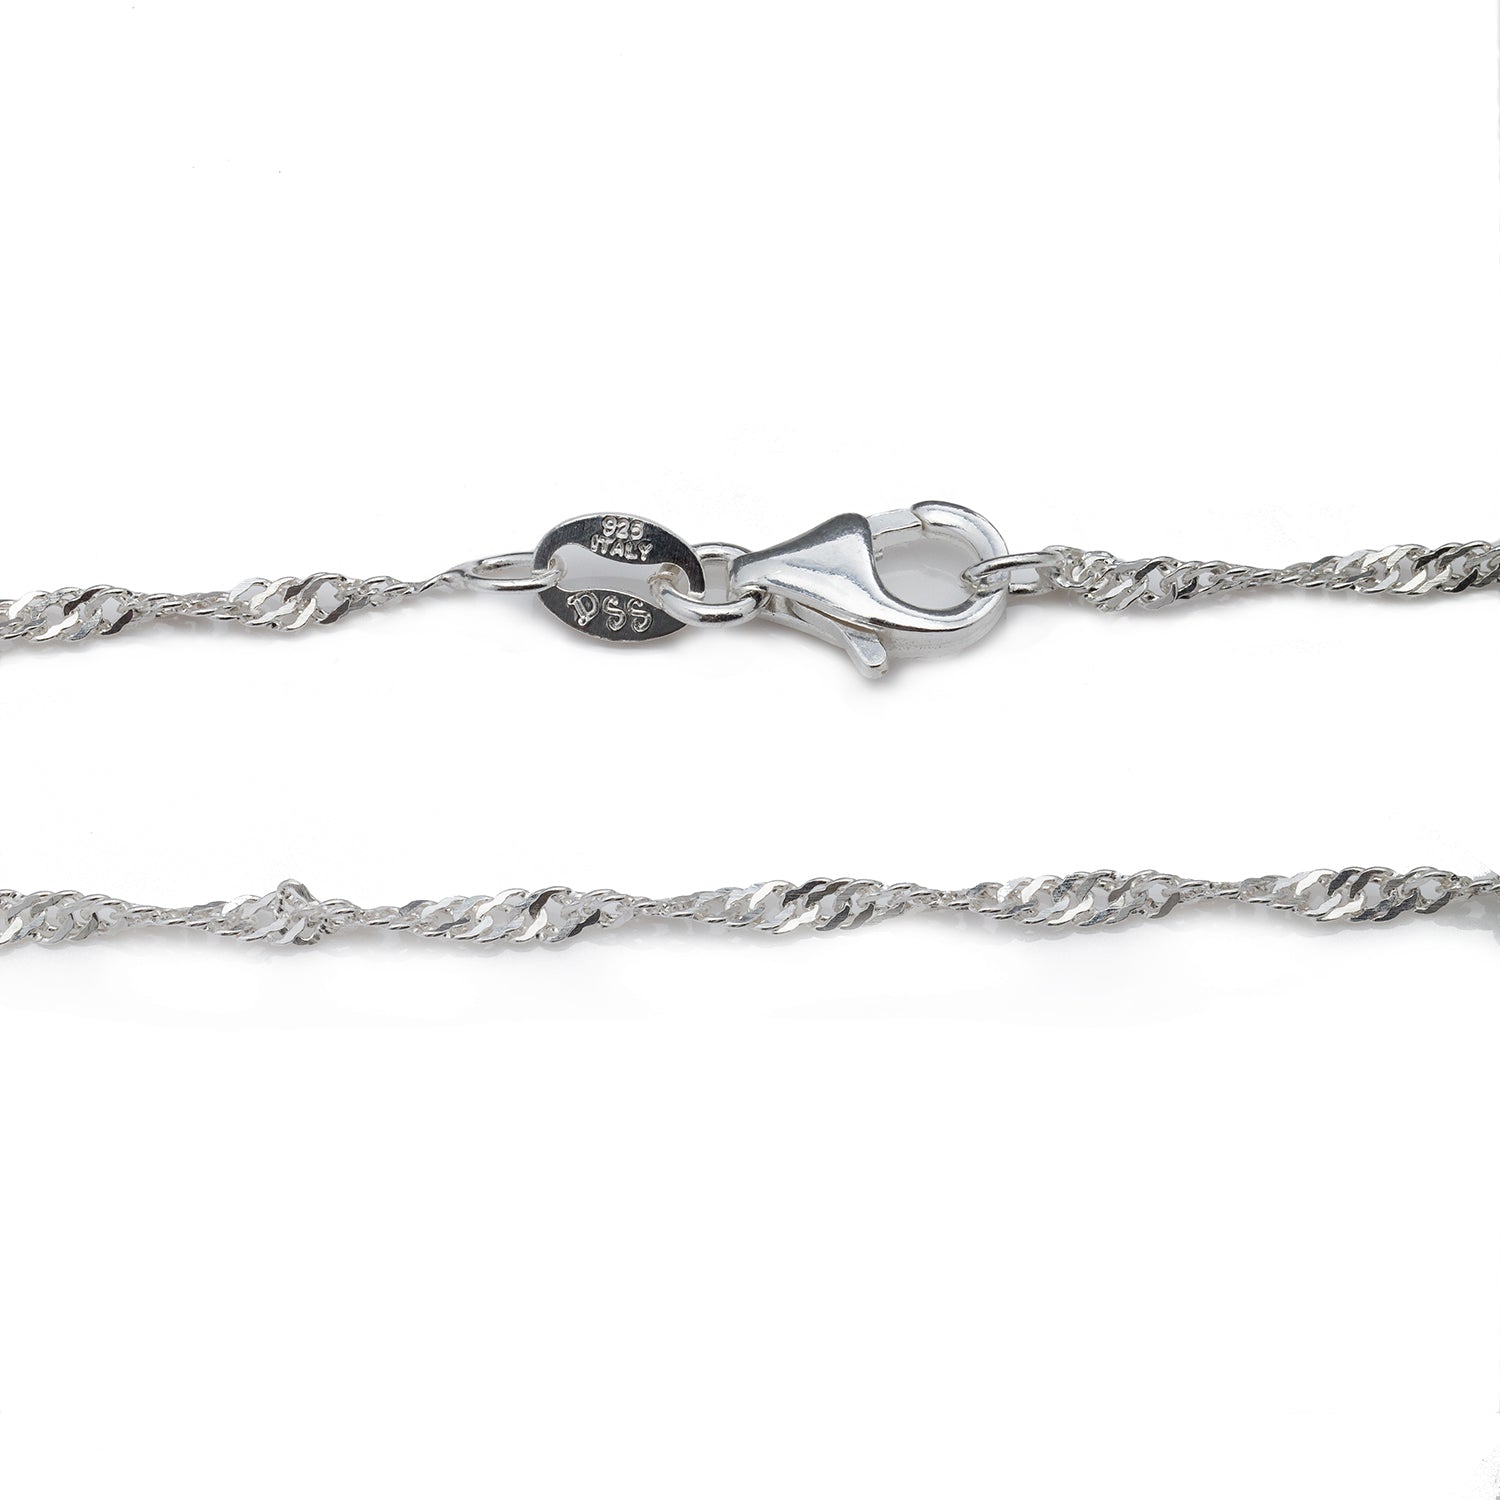 1.2MM Sterling Silver Singapore Chain with Lobster Claw Clasp. This picture shows the clasp and our logo. This chain is very shiny and is perfect with or without a pendant.